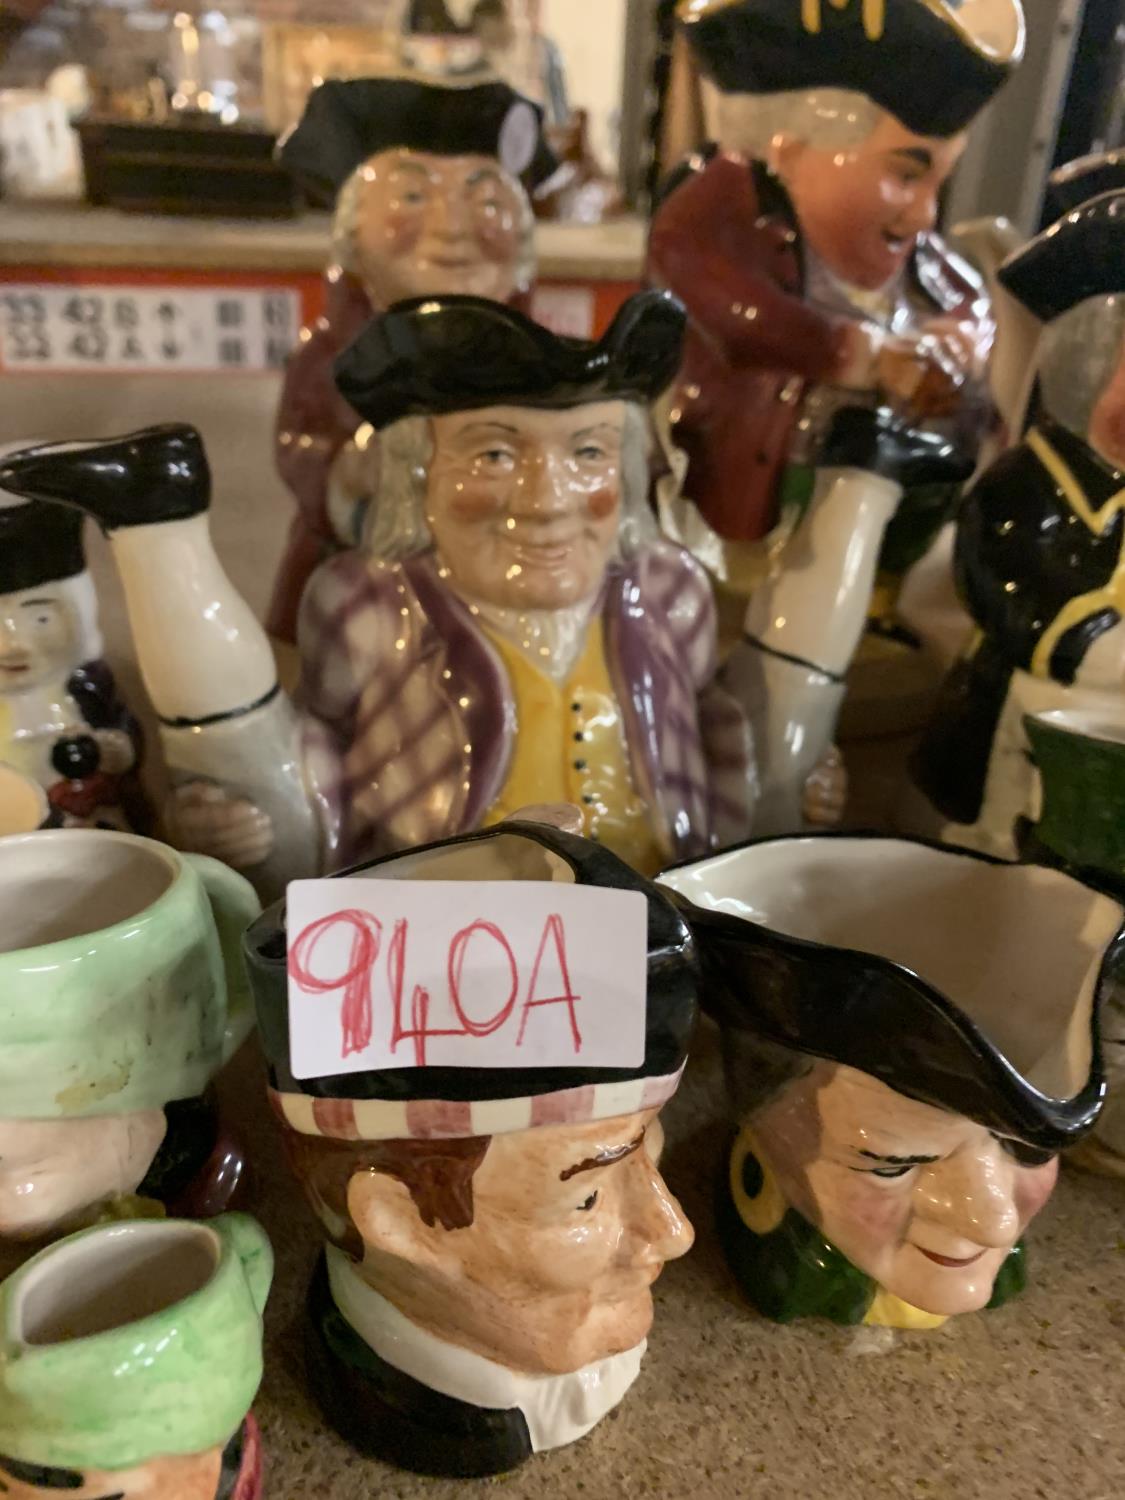 A LARGE COLLECTION OF VARIOUS TOBY JUGS